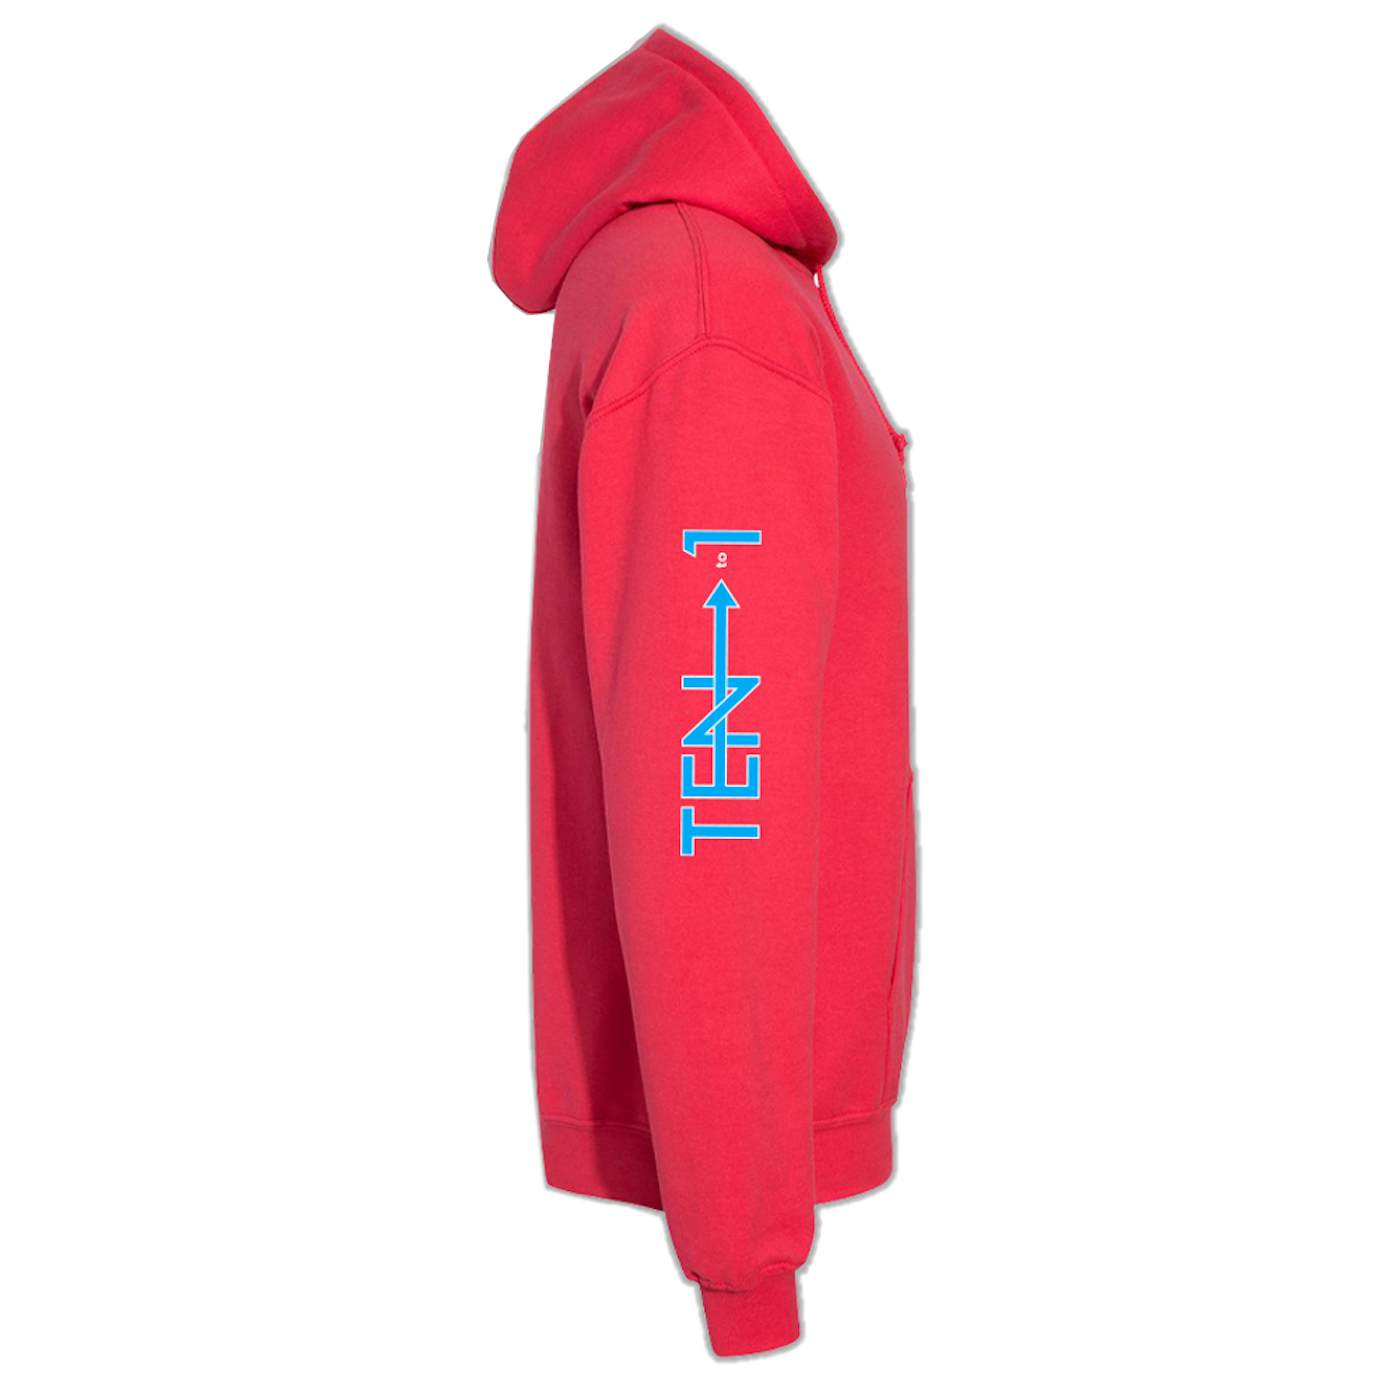 Lonestar Red 10 to 1 Pullover Hoodie